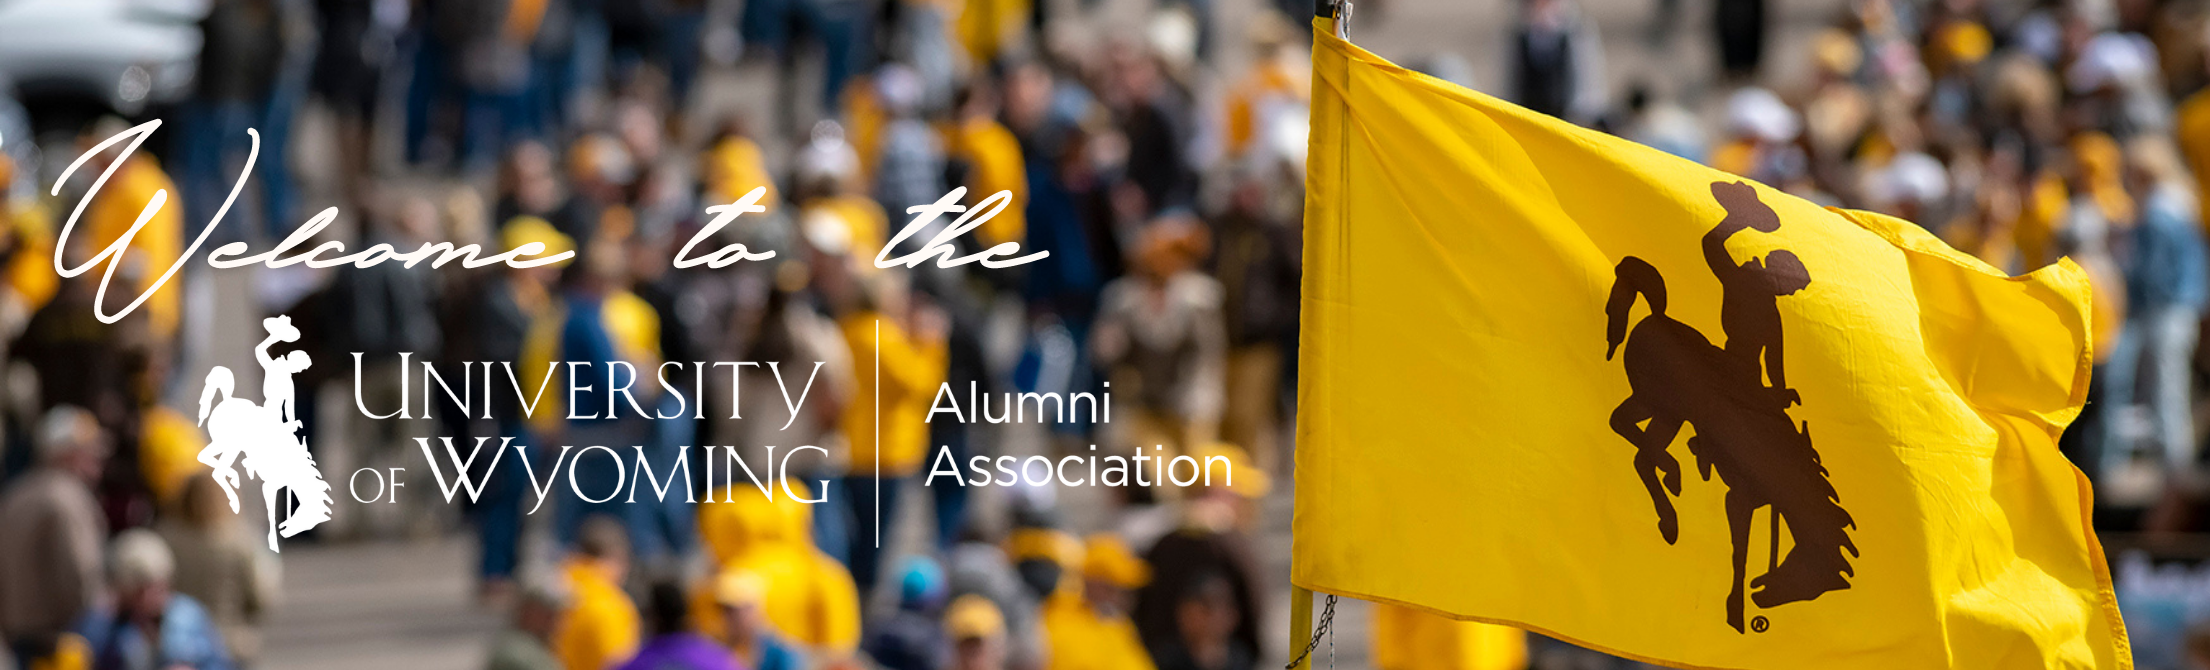 Welcome to the University of Wyoming Alumni Association in tailgate alley